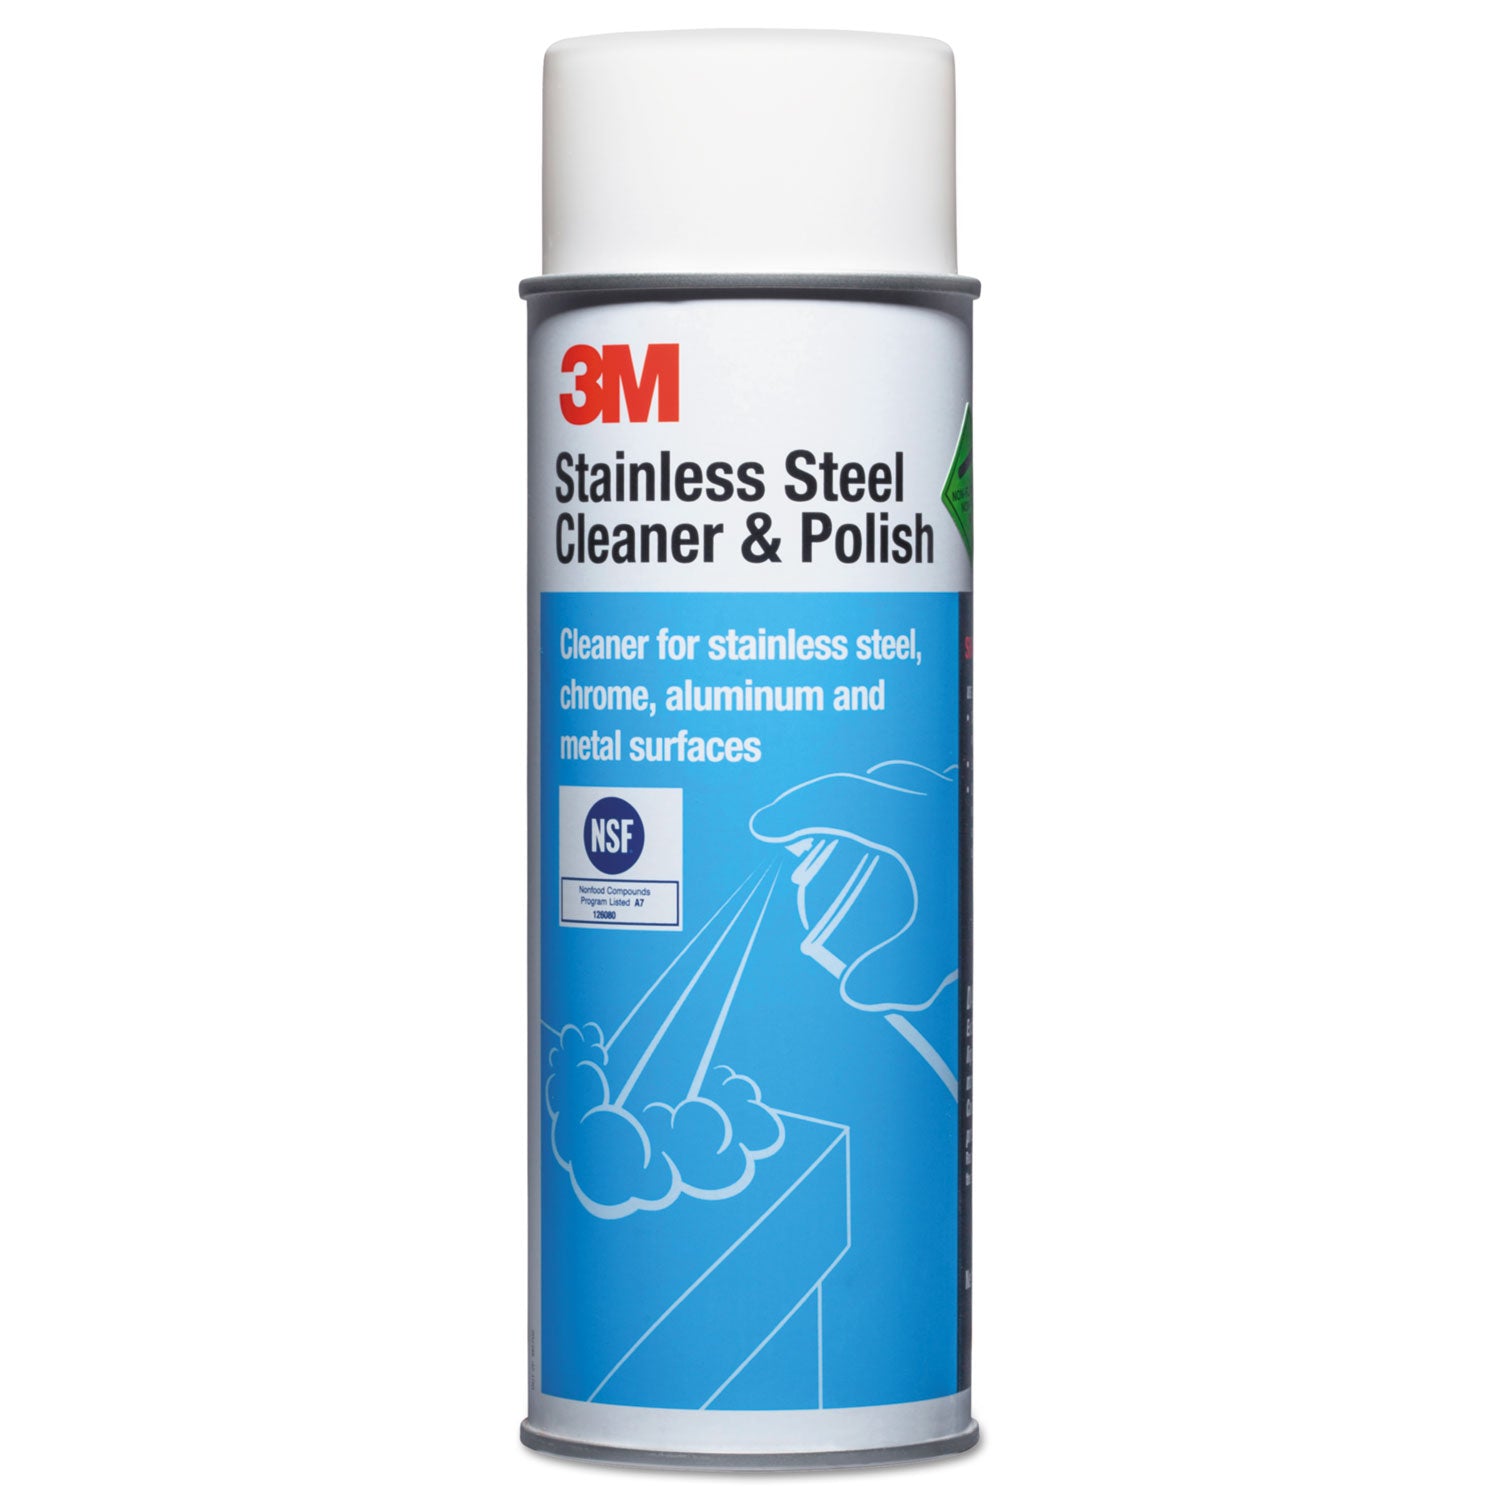 stainless-steel-cleaner-and-polish-lime-scent-foam-21-oz-aerosol-spray-12-carton_mmm14002 - 1